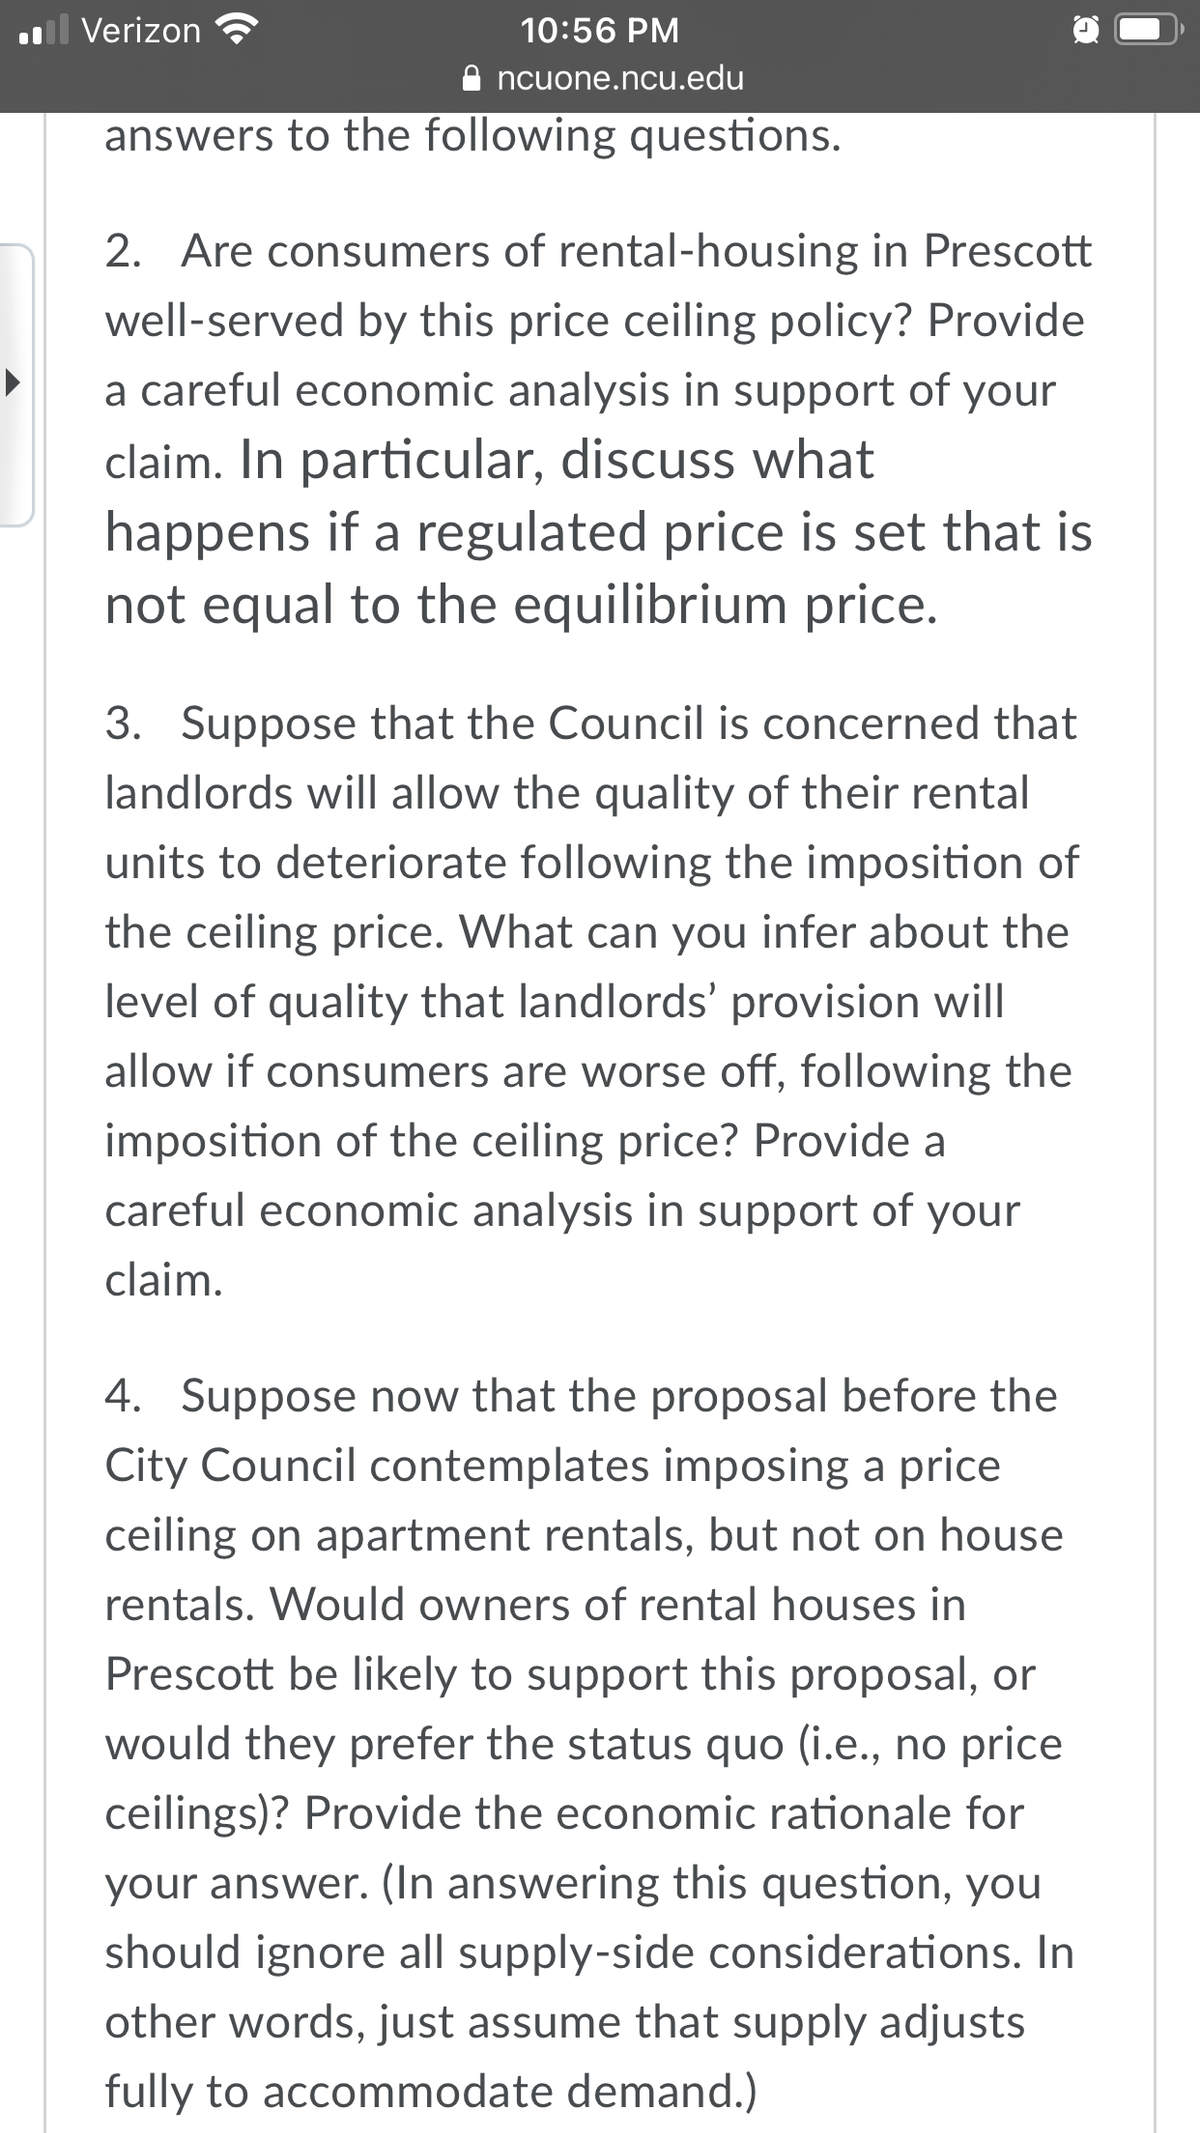 l Verizon
10:56 PM
ncuone.ncu.edu
answers to the following questions.
2.
Are consumers of rental-housing in Prescott
well-served by this price ceiling policy? Provide
a careful economic analysis in support of your
claim. In particular, discuss what
happens if a regulated price is set that is
not equal to the equilibrium price.
3. Suppose that the Council is concerned that
landlords will allow the quality of their rental
units to deteriorate following the imposition of
the ceiling price. What can you infer about the
level of quality that landlords' provision will
allow if consumers are worse off, following the
imposition of the ceiling price? Provide a
careful economic analysis in support of your
claim.
Suppose now that the proposal before the
City Council contemplates imposing a price
4.
ceiling on apartment rentals, but not on house
rentals. Would owners of rental houses in
Prescott be likely to support this proposal, or
would they prefer the status quo (i.e., no price
ceilings)? Provide the economic rationale for
your answer. (In answering this question, you
should ignore all supply-side considerations. In
other words, just assume that supply adjusts
fully to accommodate demand.)
